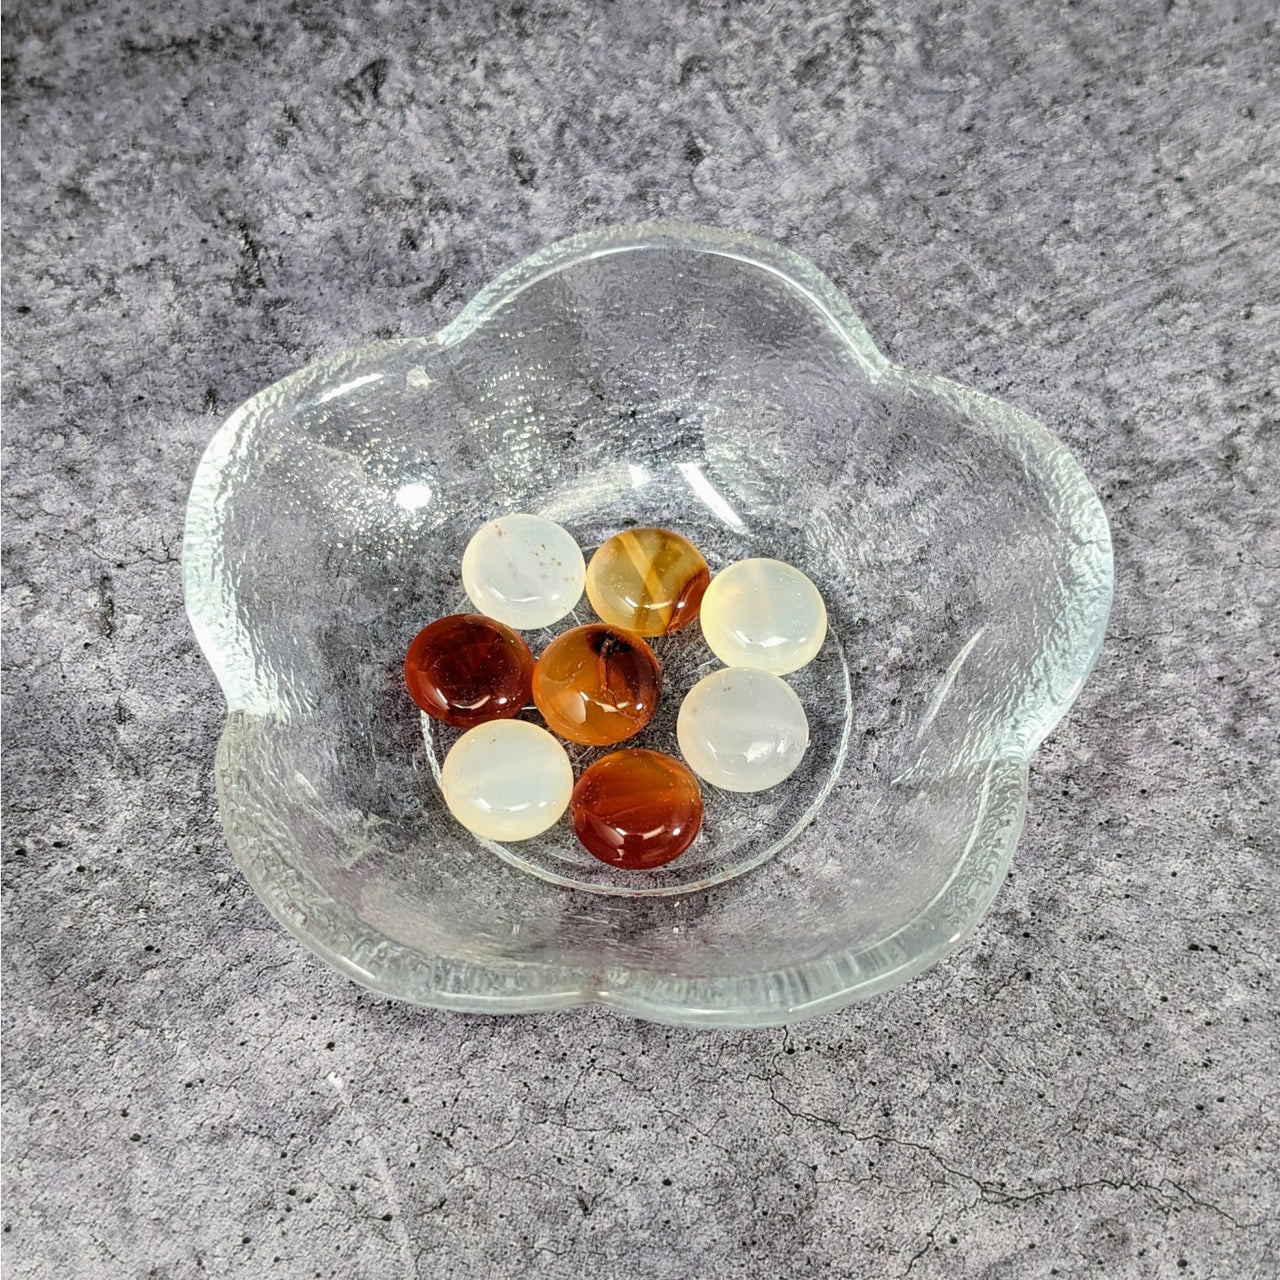 Carnelian Flat Round Bead Pack #LV3663 in a Glass Bowl Filled with Small Pieces of Glass